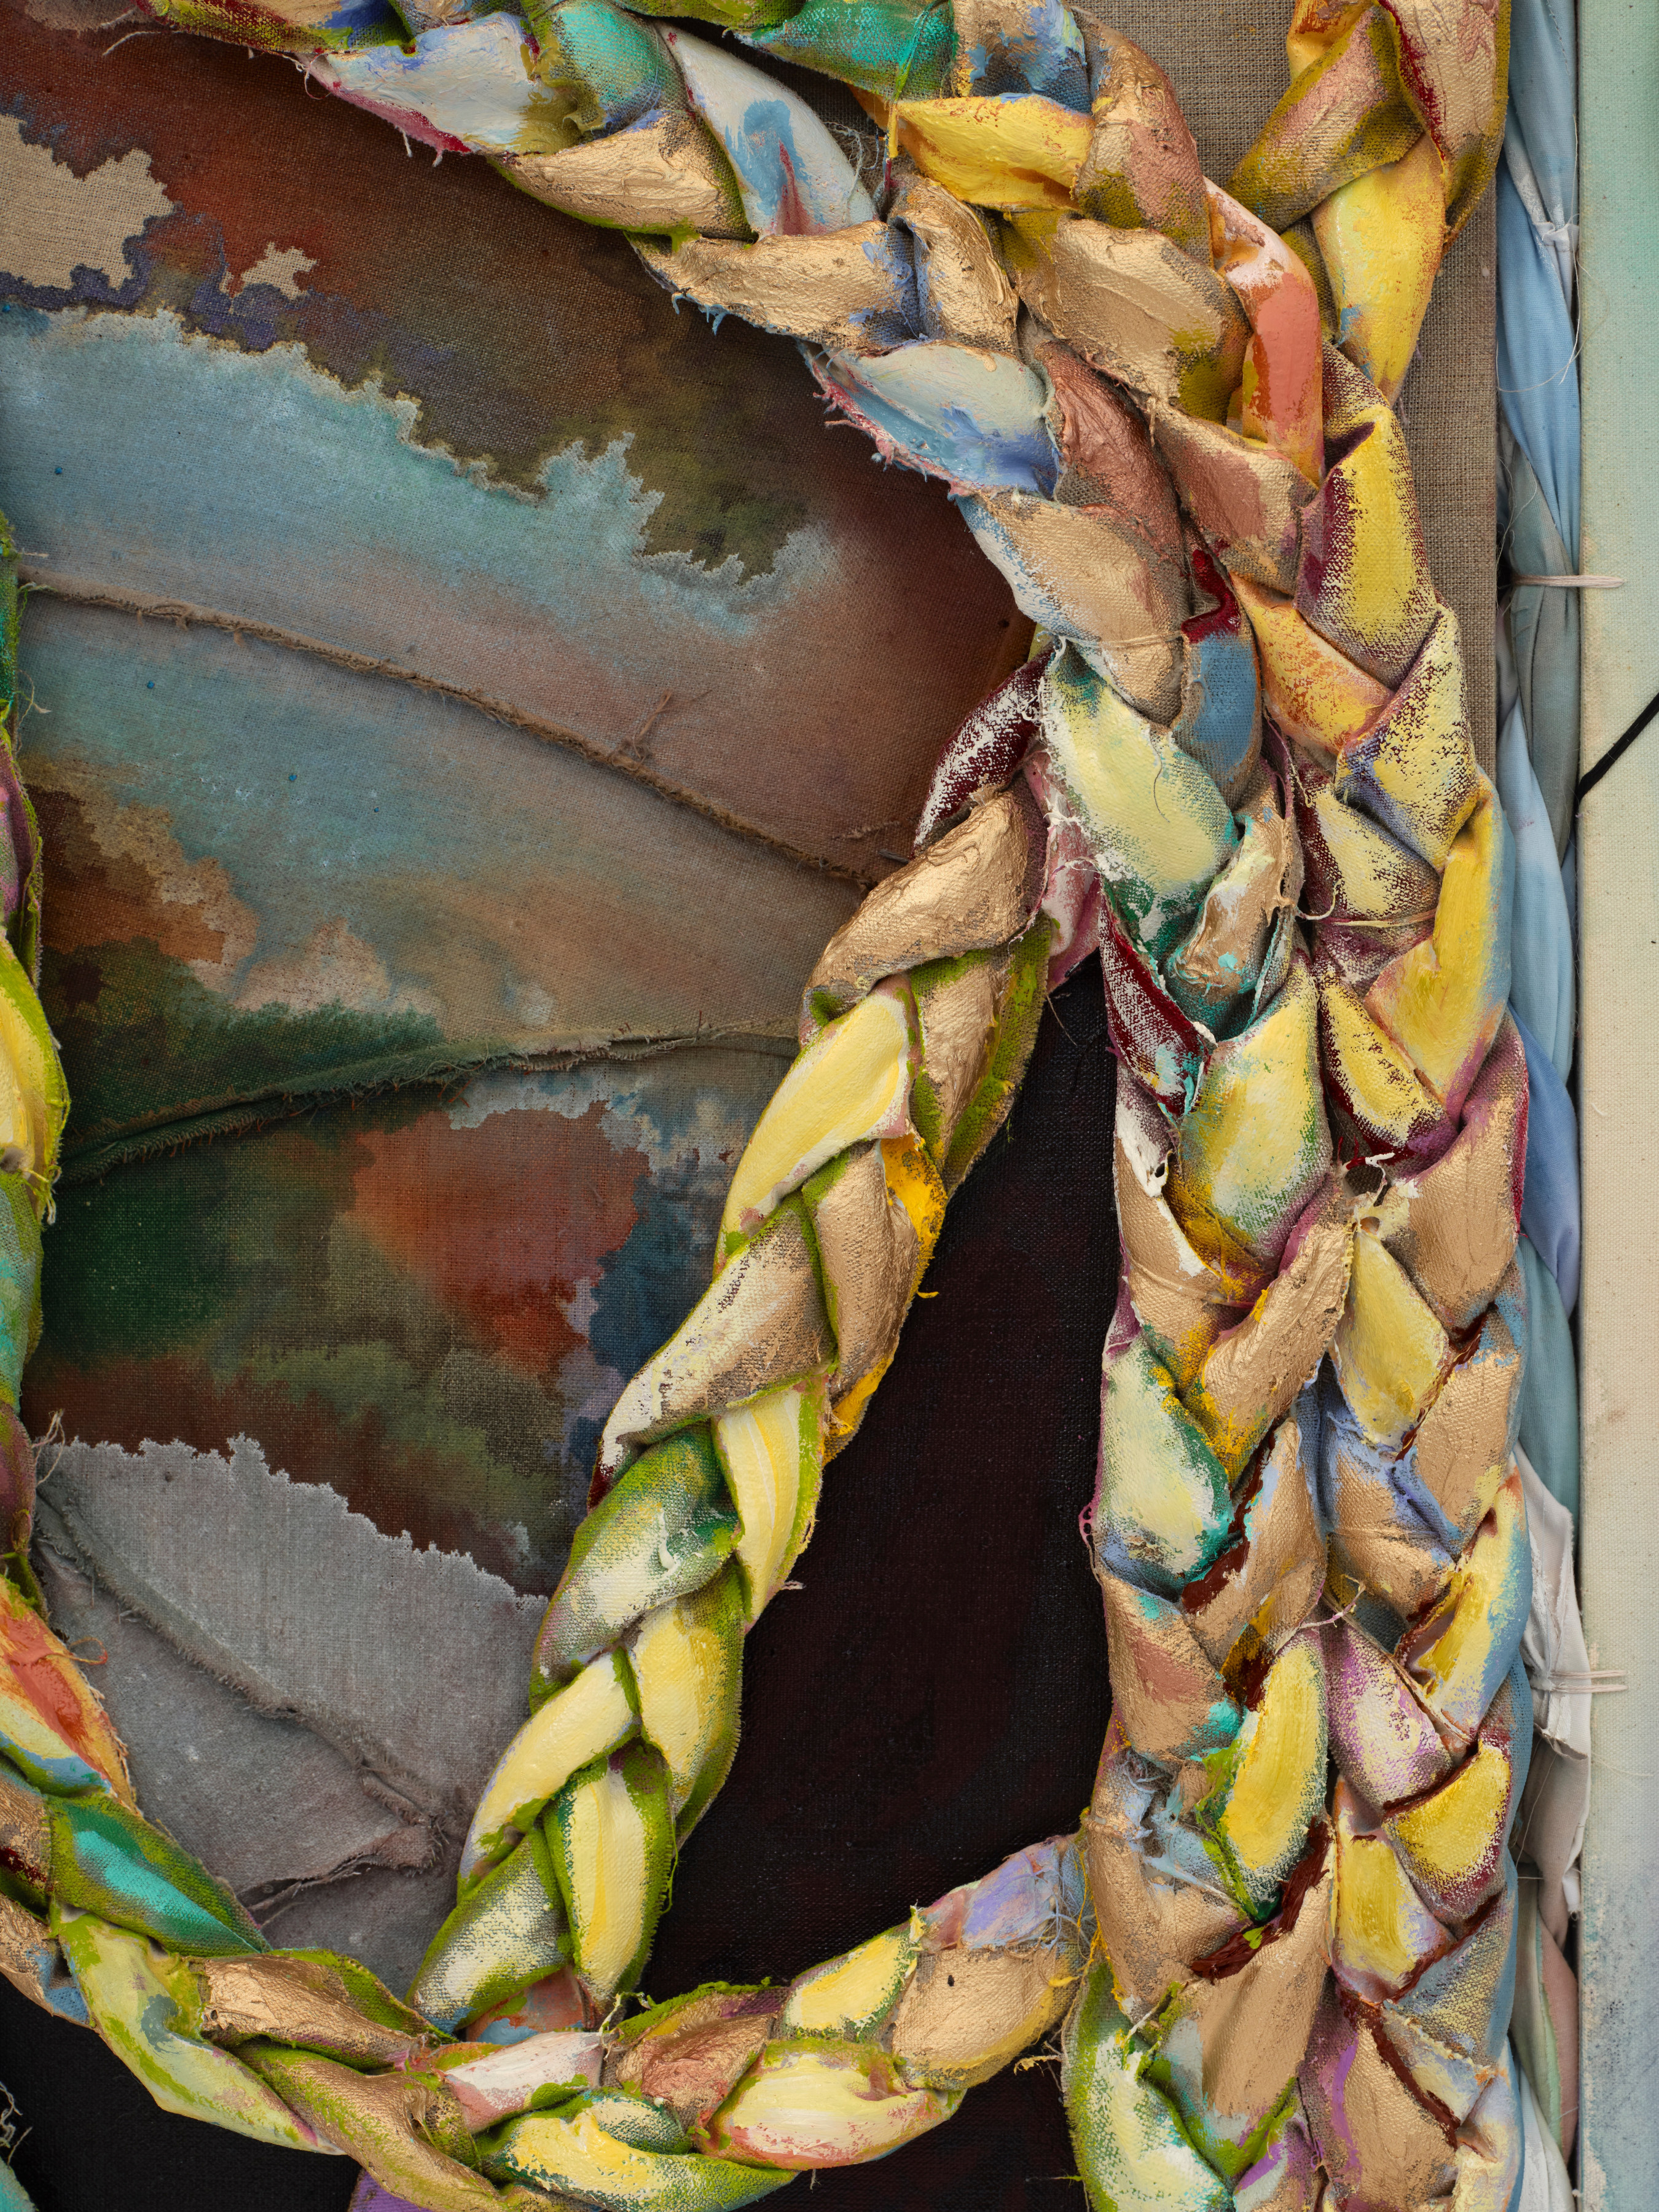 Detail of the work with braided fabric painted orange, blue, yellow and gold overtop of painted canvas in greens, reds and blues. 